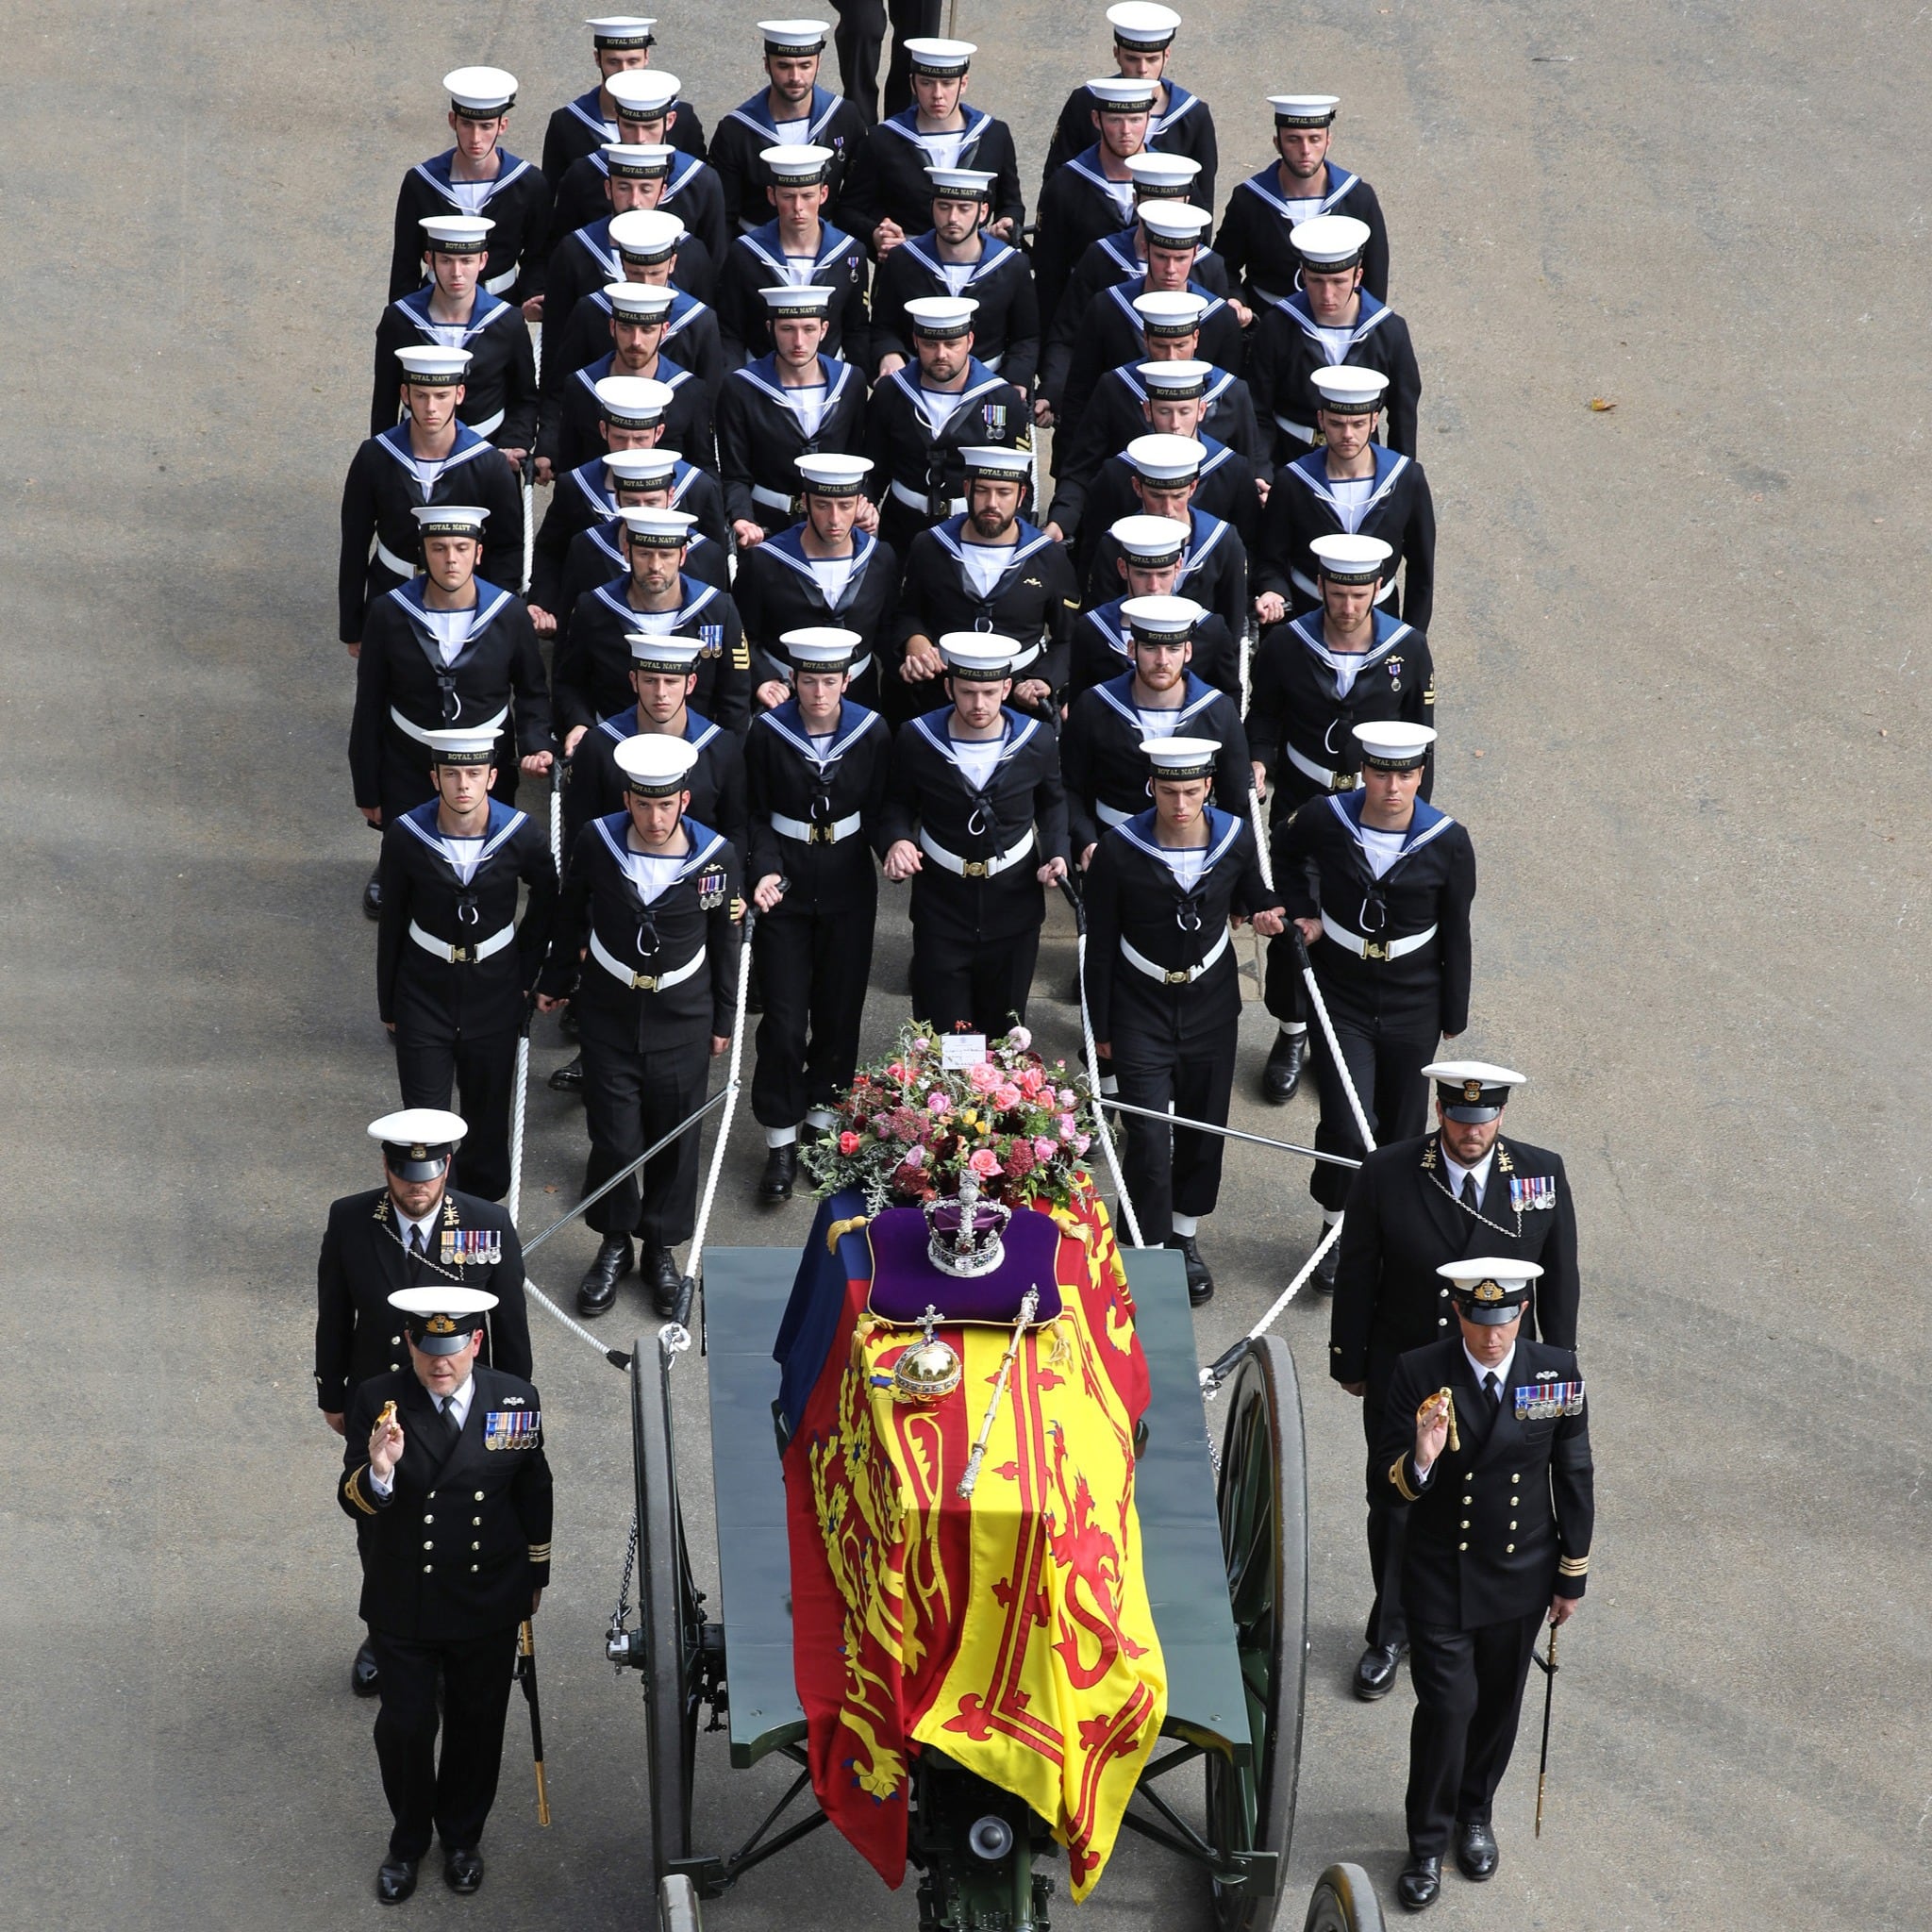 Submarine Service members forming part of the gun carriage crew that carried Her Majesty Queen Elizabeth II from Westminster Abbey to Westminer Cathedral.